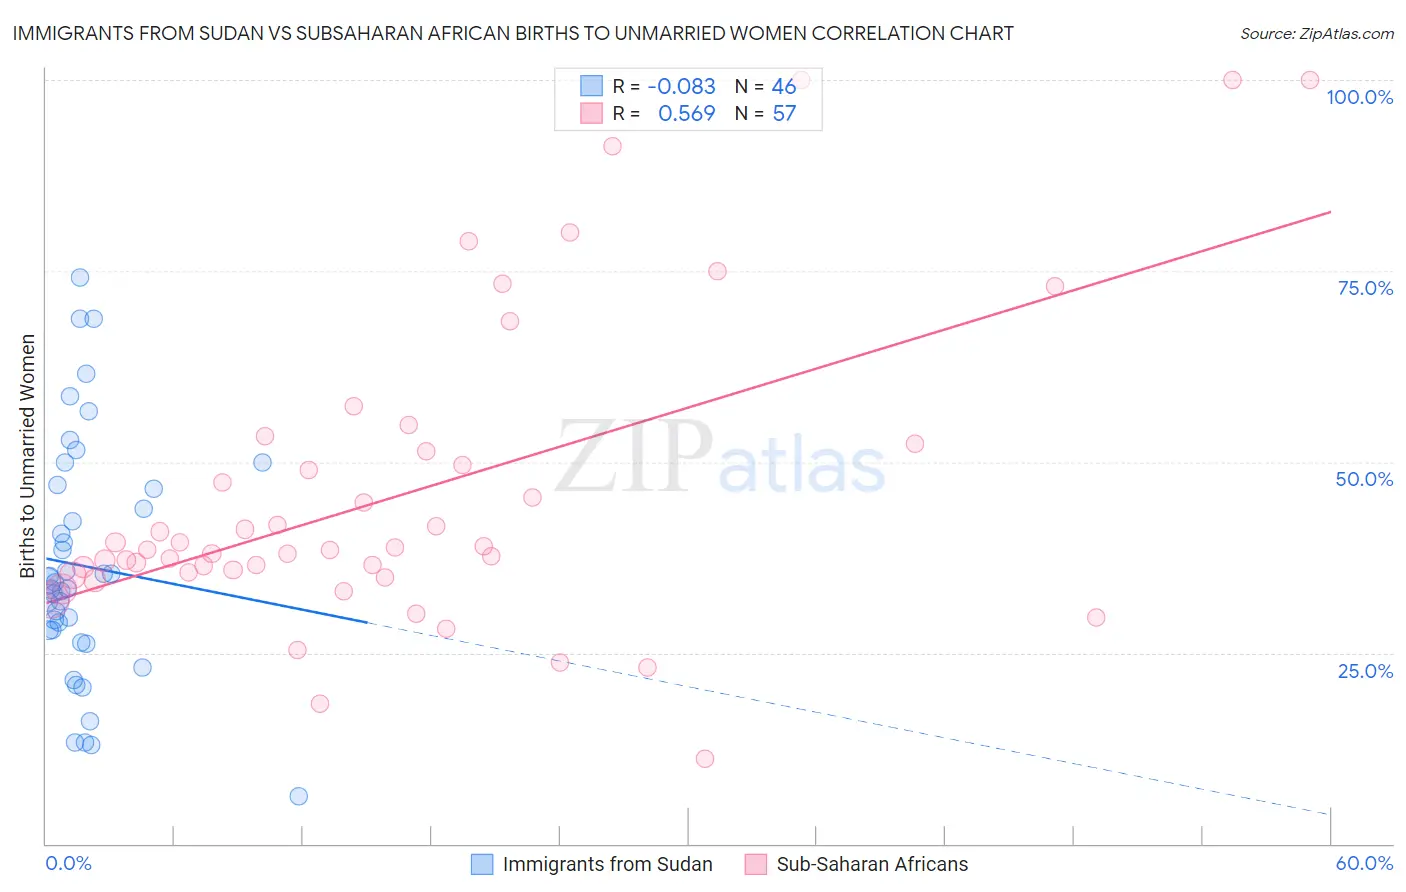 Immigrants from Sudan vs Subsaharan African Births to Unmarried Women